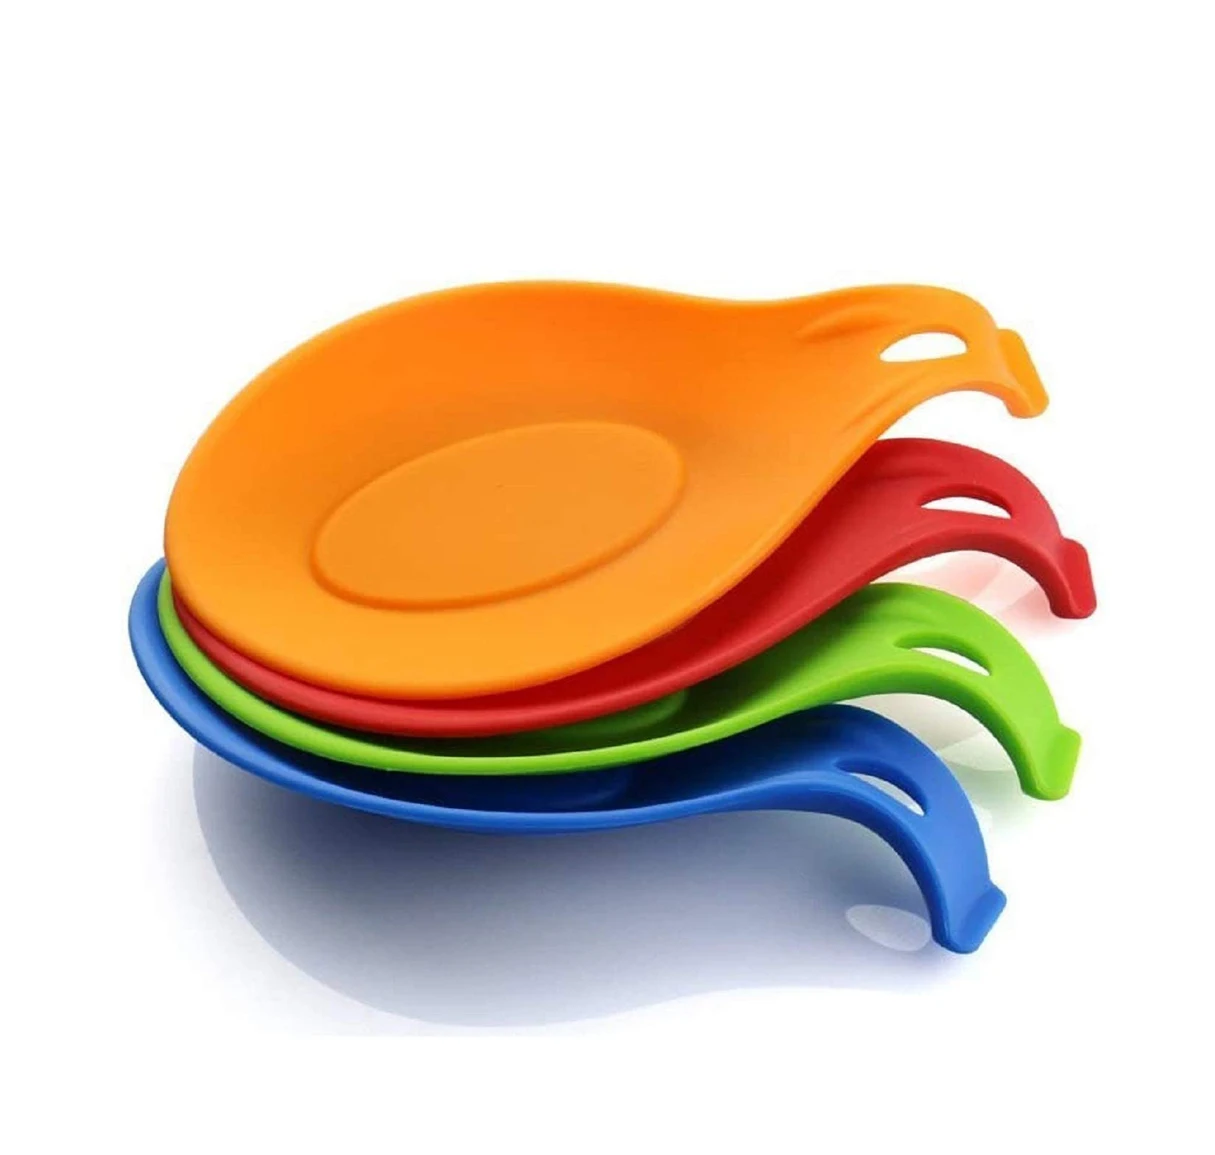 

Hot Selling Flexible Almond-Shaped Silicone Kitchen Utensil Spoon Rest Ladle Spoon Holder, Green / blue / orange / red